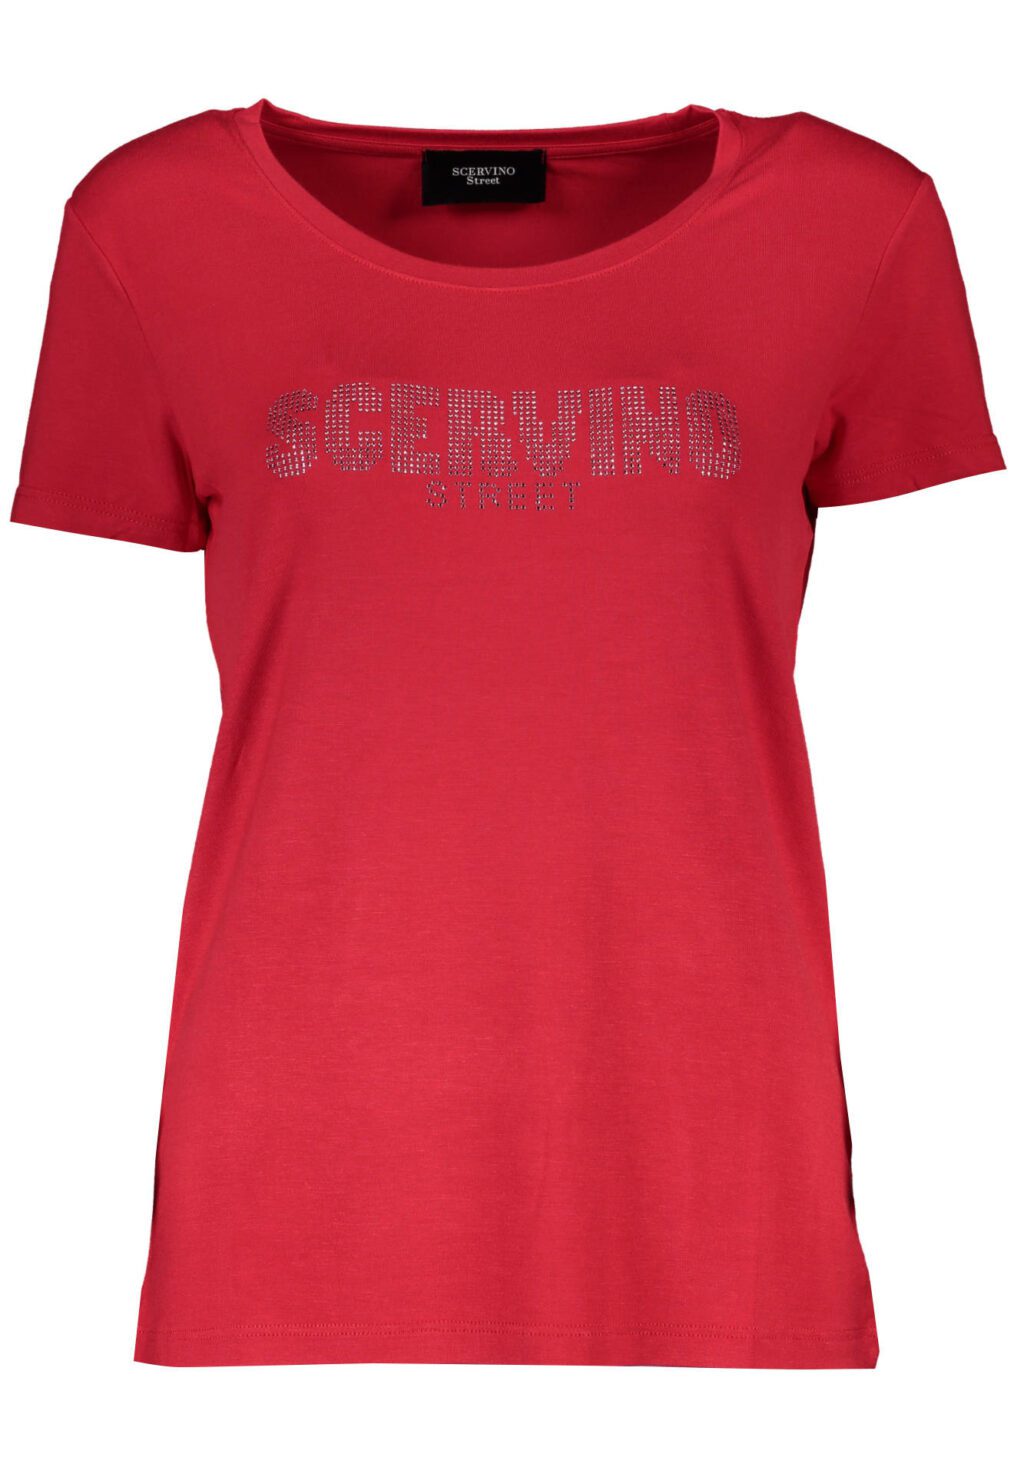 SCERVINO STREET WOMEN'S SHORT SLEEVE T-SHIRT RED D38TL0700-TDS001_ROSSO_SC007-CORALLO